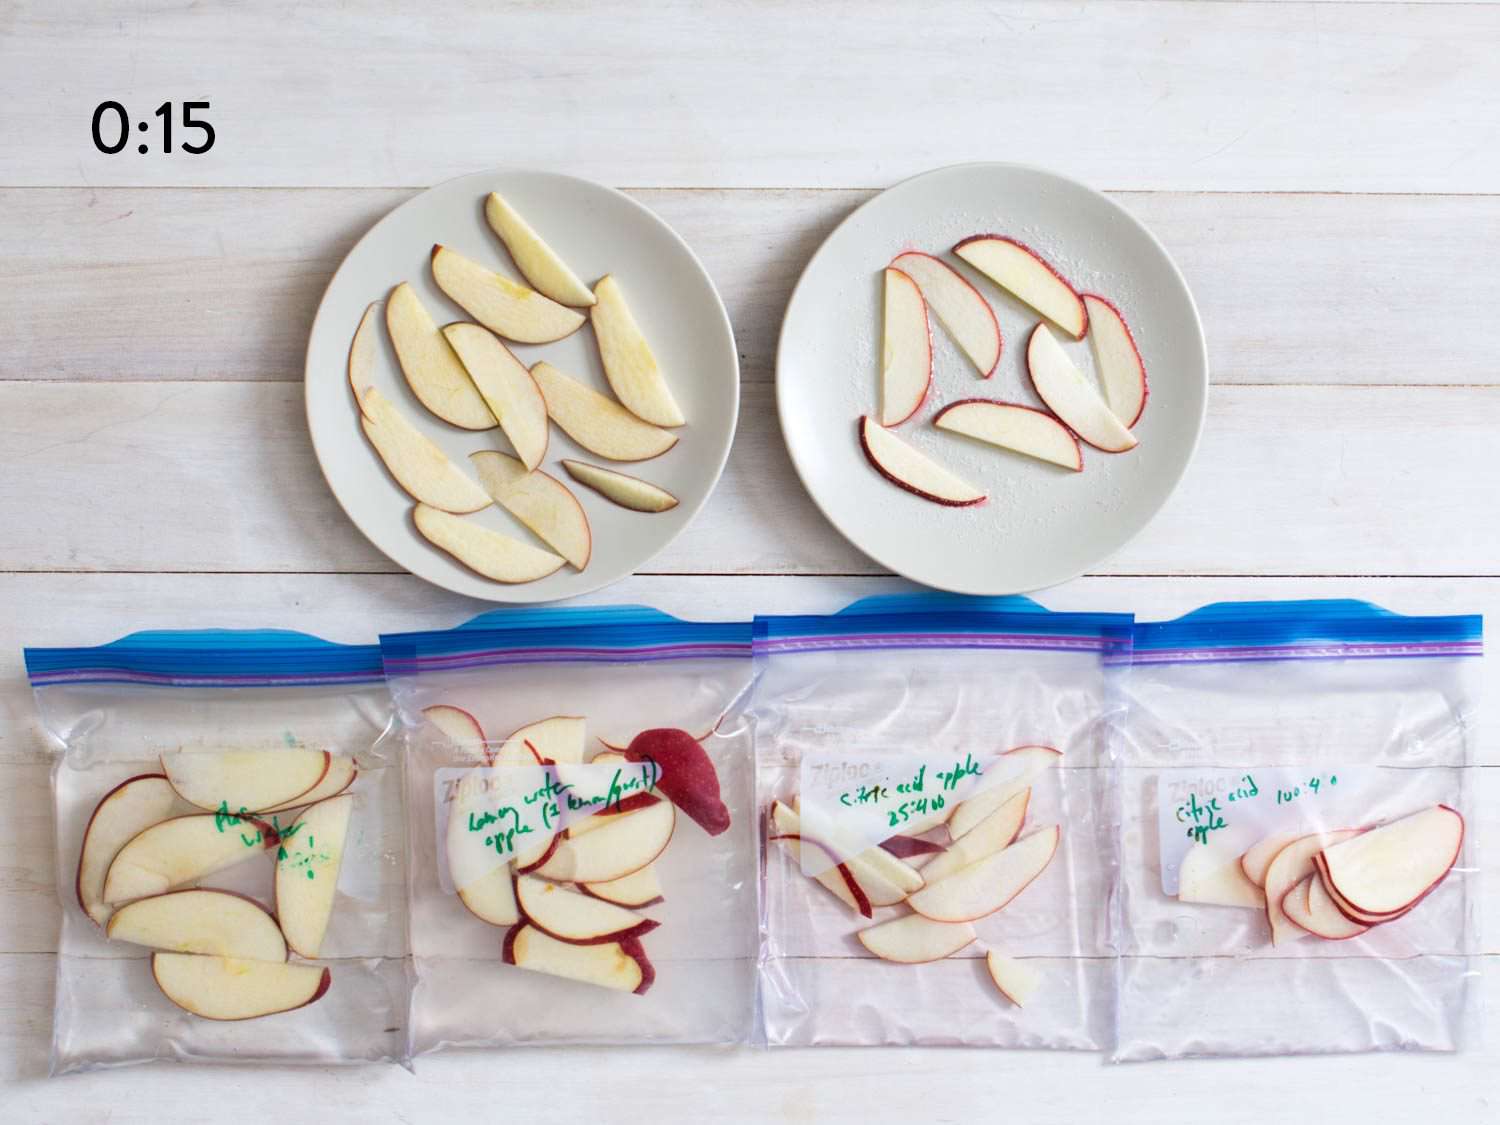 Comparison of bags of cut apples after 15 seconds.